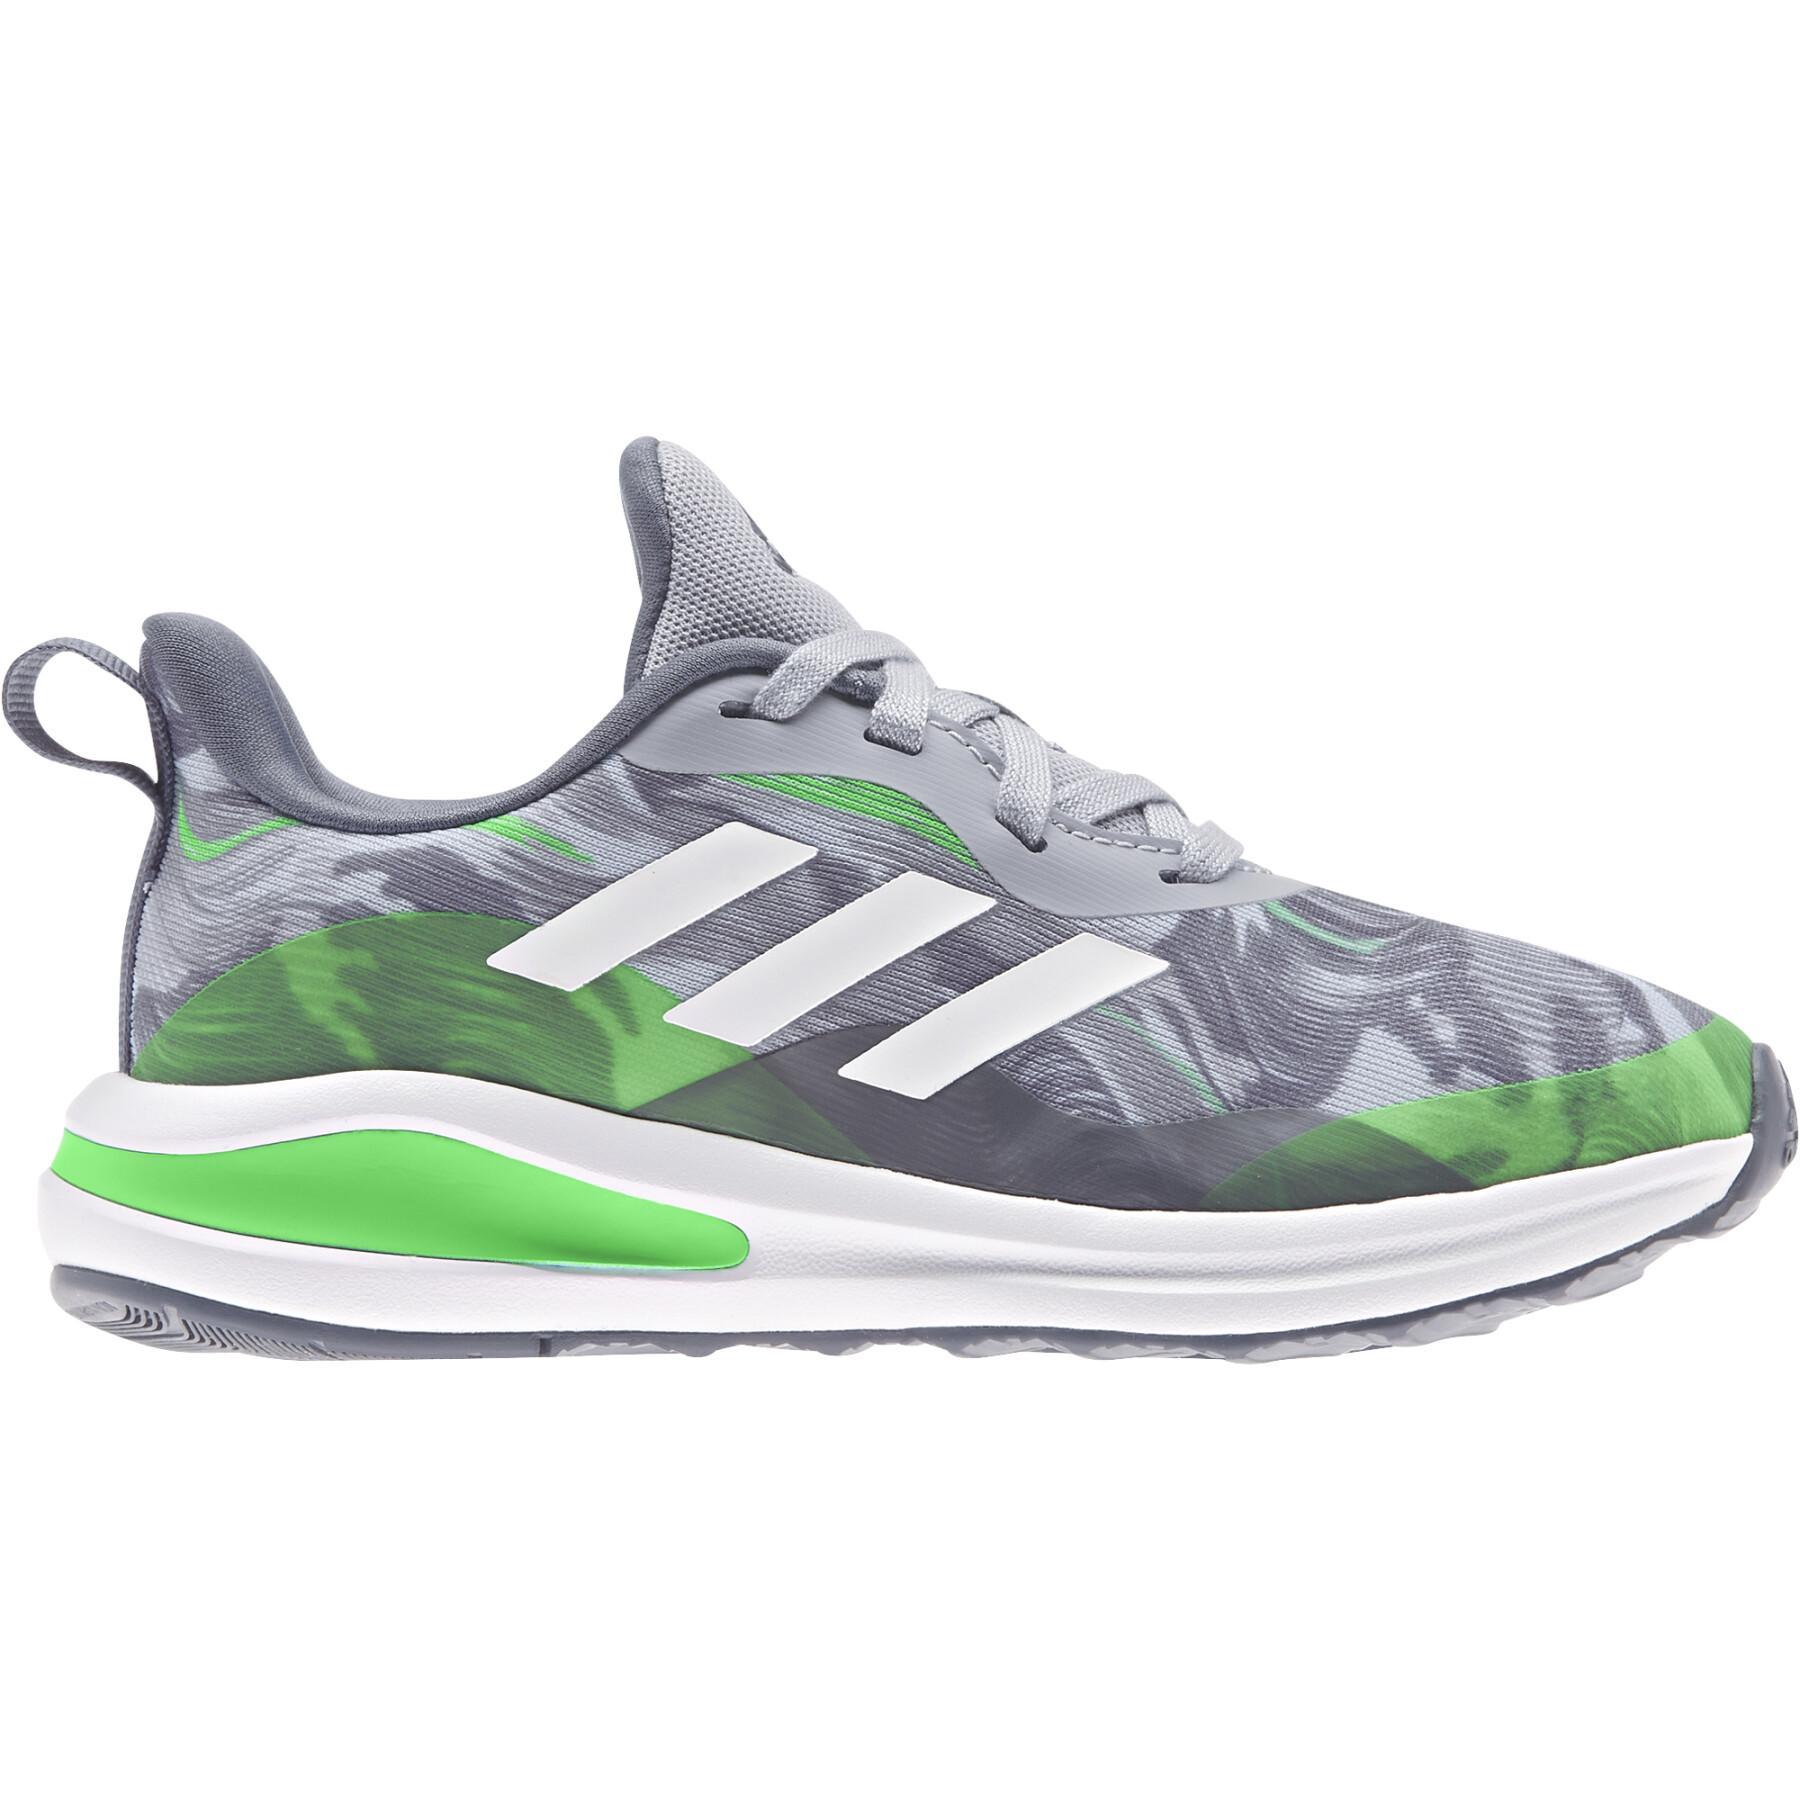 Children's running shoes adidas FortaRun Lace